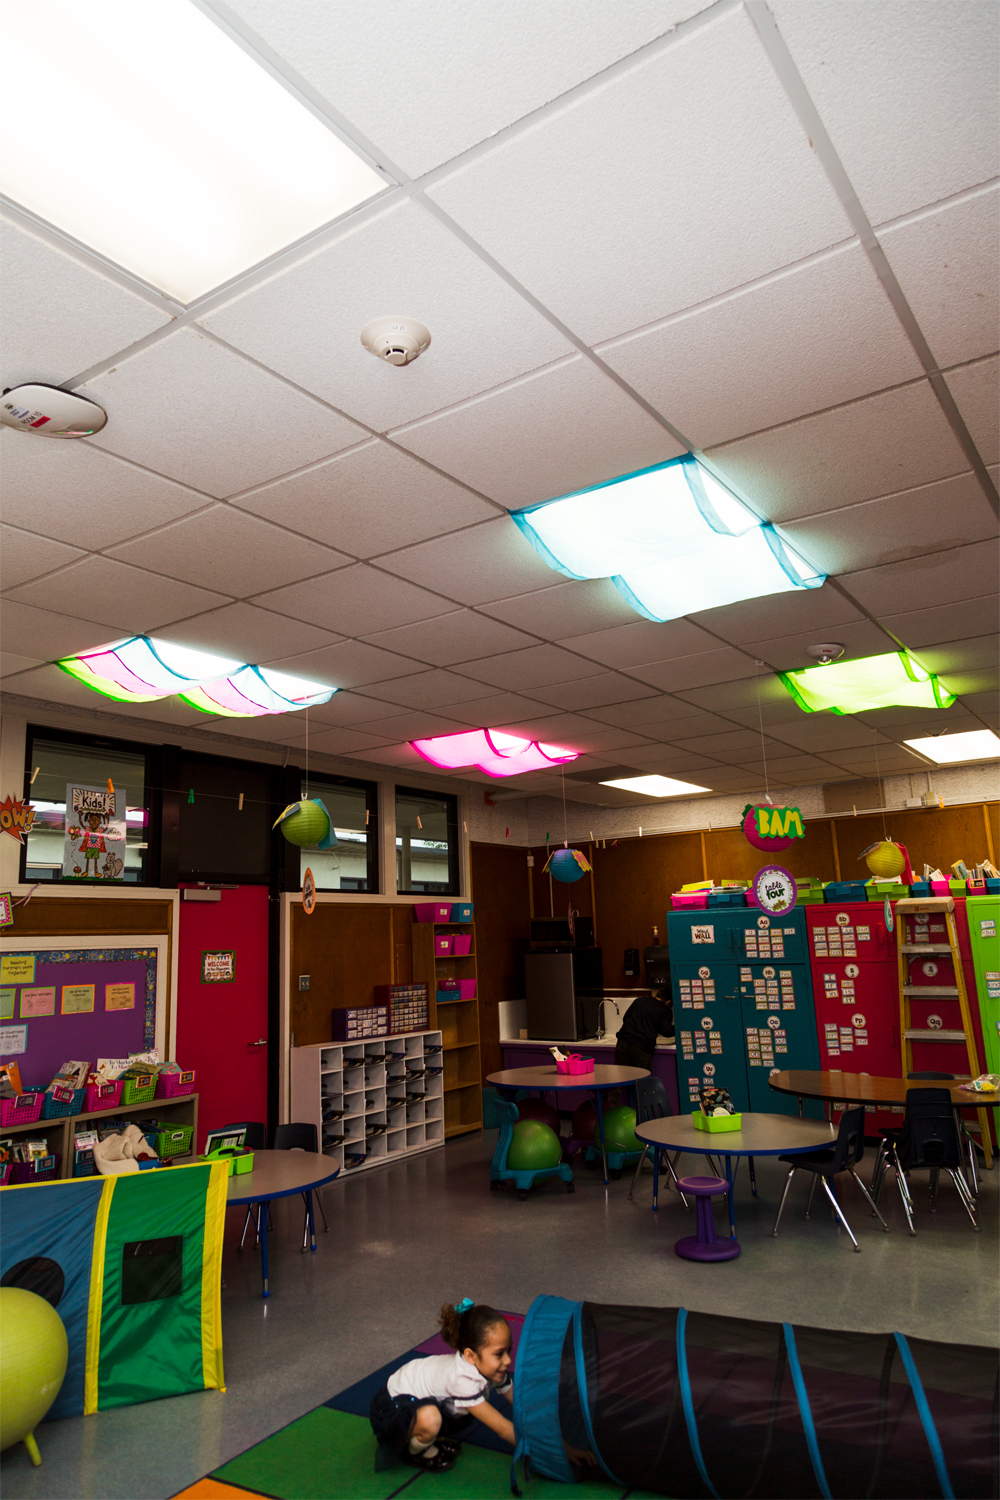 Ways to Spice Up Your Classroom or Playroom